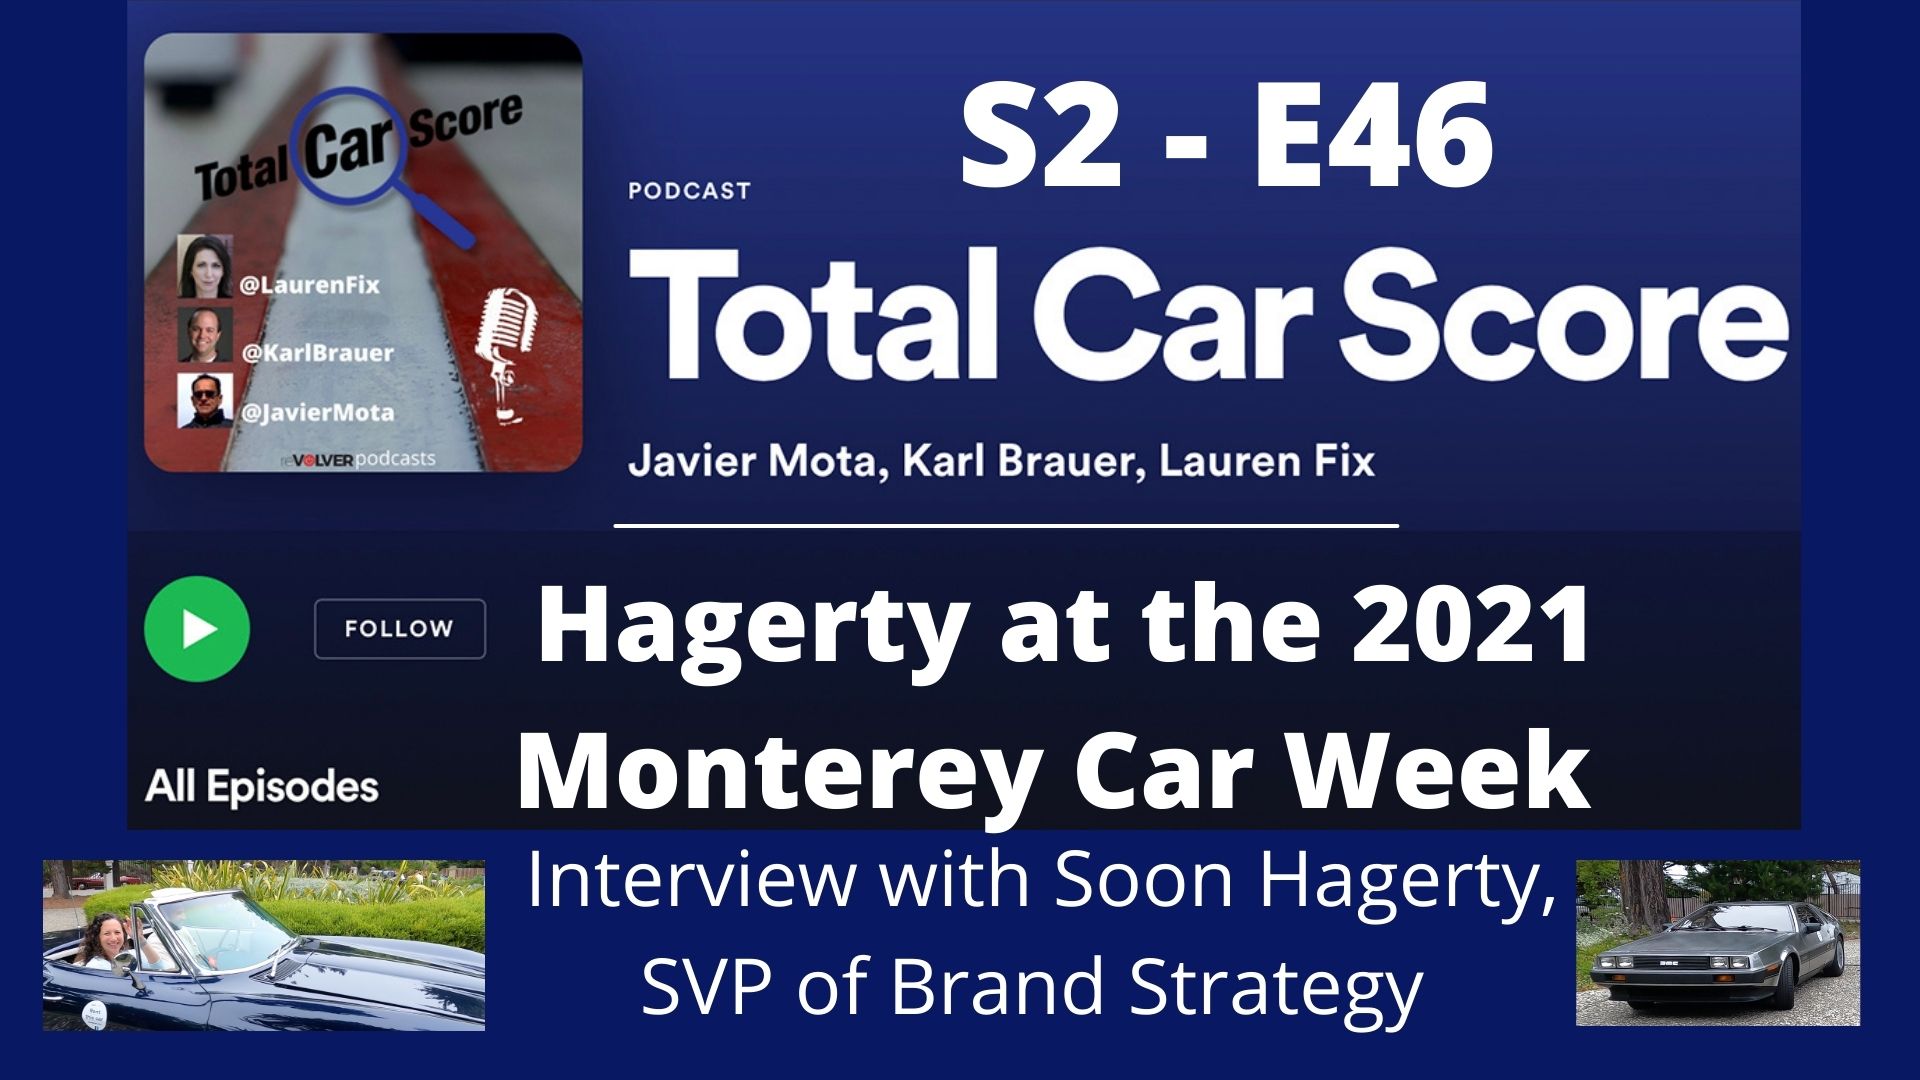 S2E46: Hagerty at the 2021 Monterey Car Week